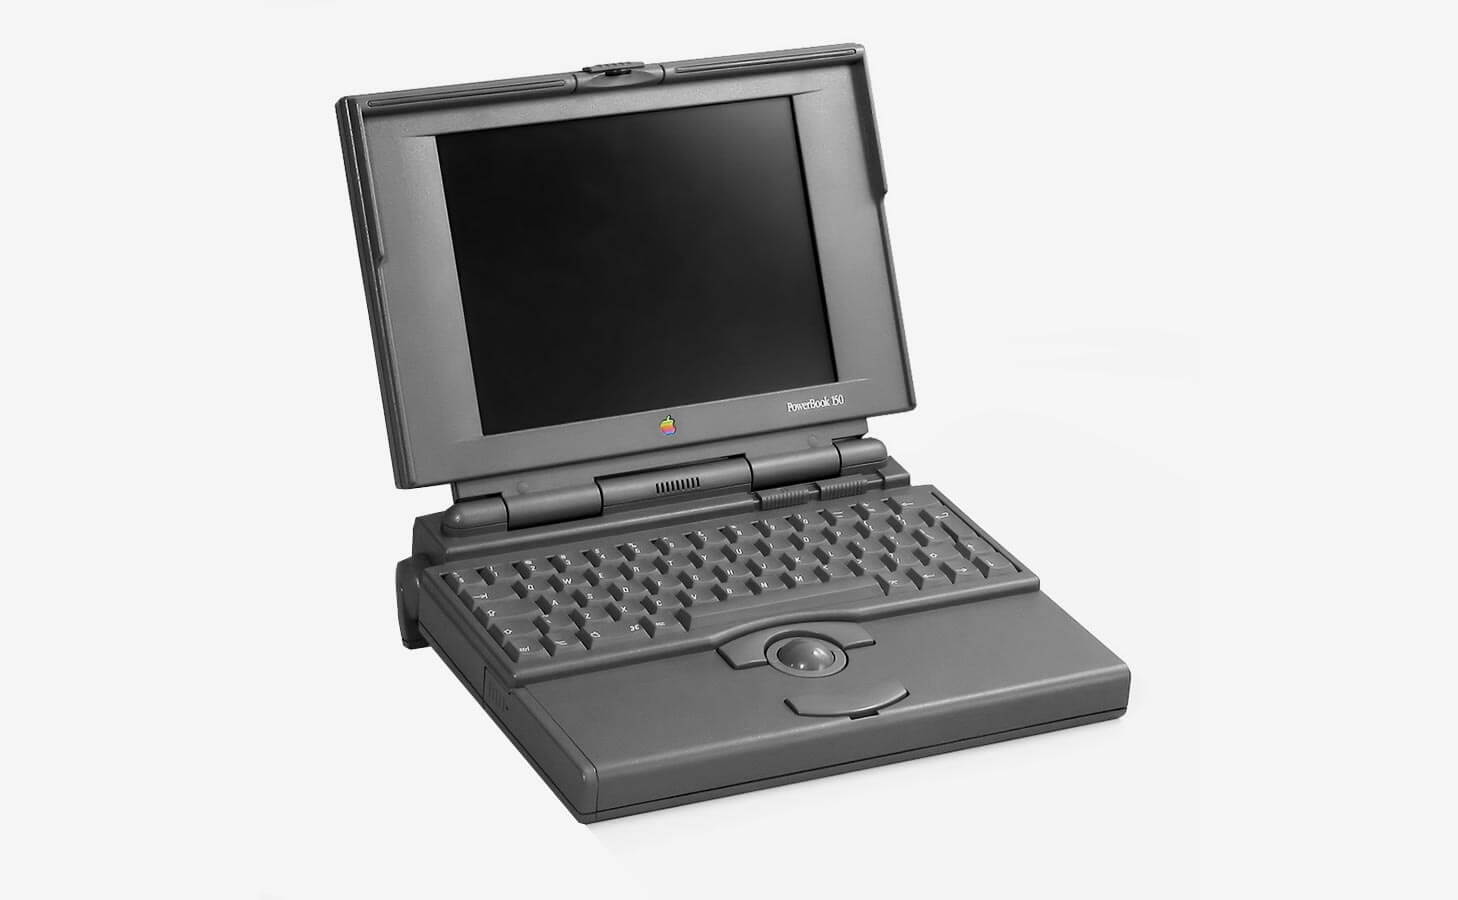 Altes Apple-Notebook - Wikipedia